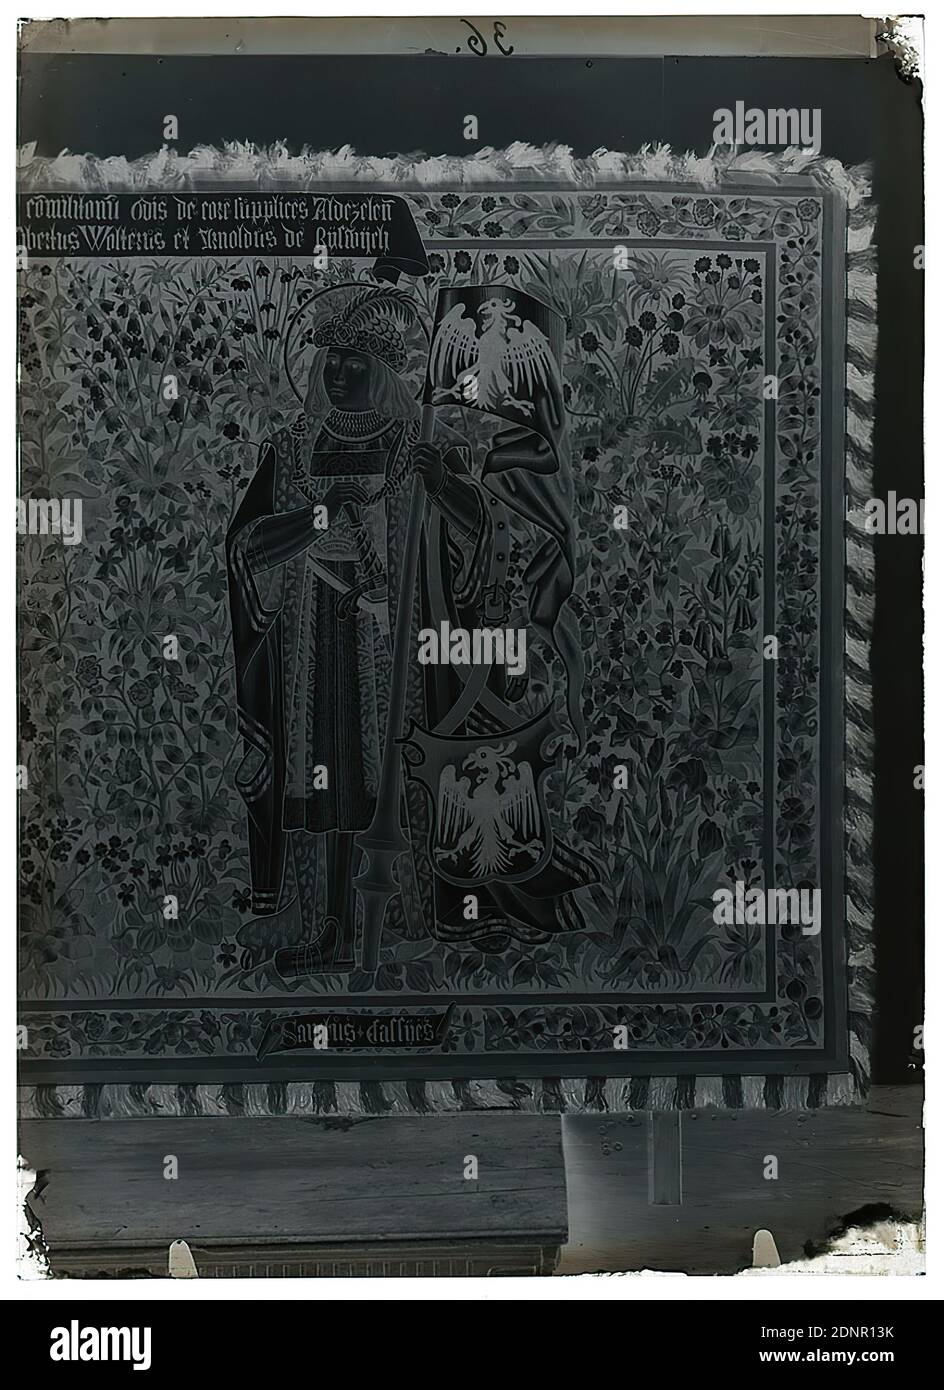 Wilhelm Weimar, knitting, glass negative, black and white negative process, total: height: 17.8 cm; width: 12.8 cm, numbered: o.: in black ink: 36. work of applied arts (textiles), saints, floral ornaments, ornaments, banderole, escutcheon, heraldic symbol, sword, heraldic animals, eagles (birds), (military) flags and standards, carpets, tapestries (collecting and exhibiting works of art), carpet, rug, bridge Stock Photo